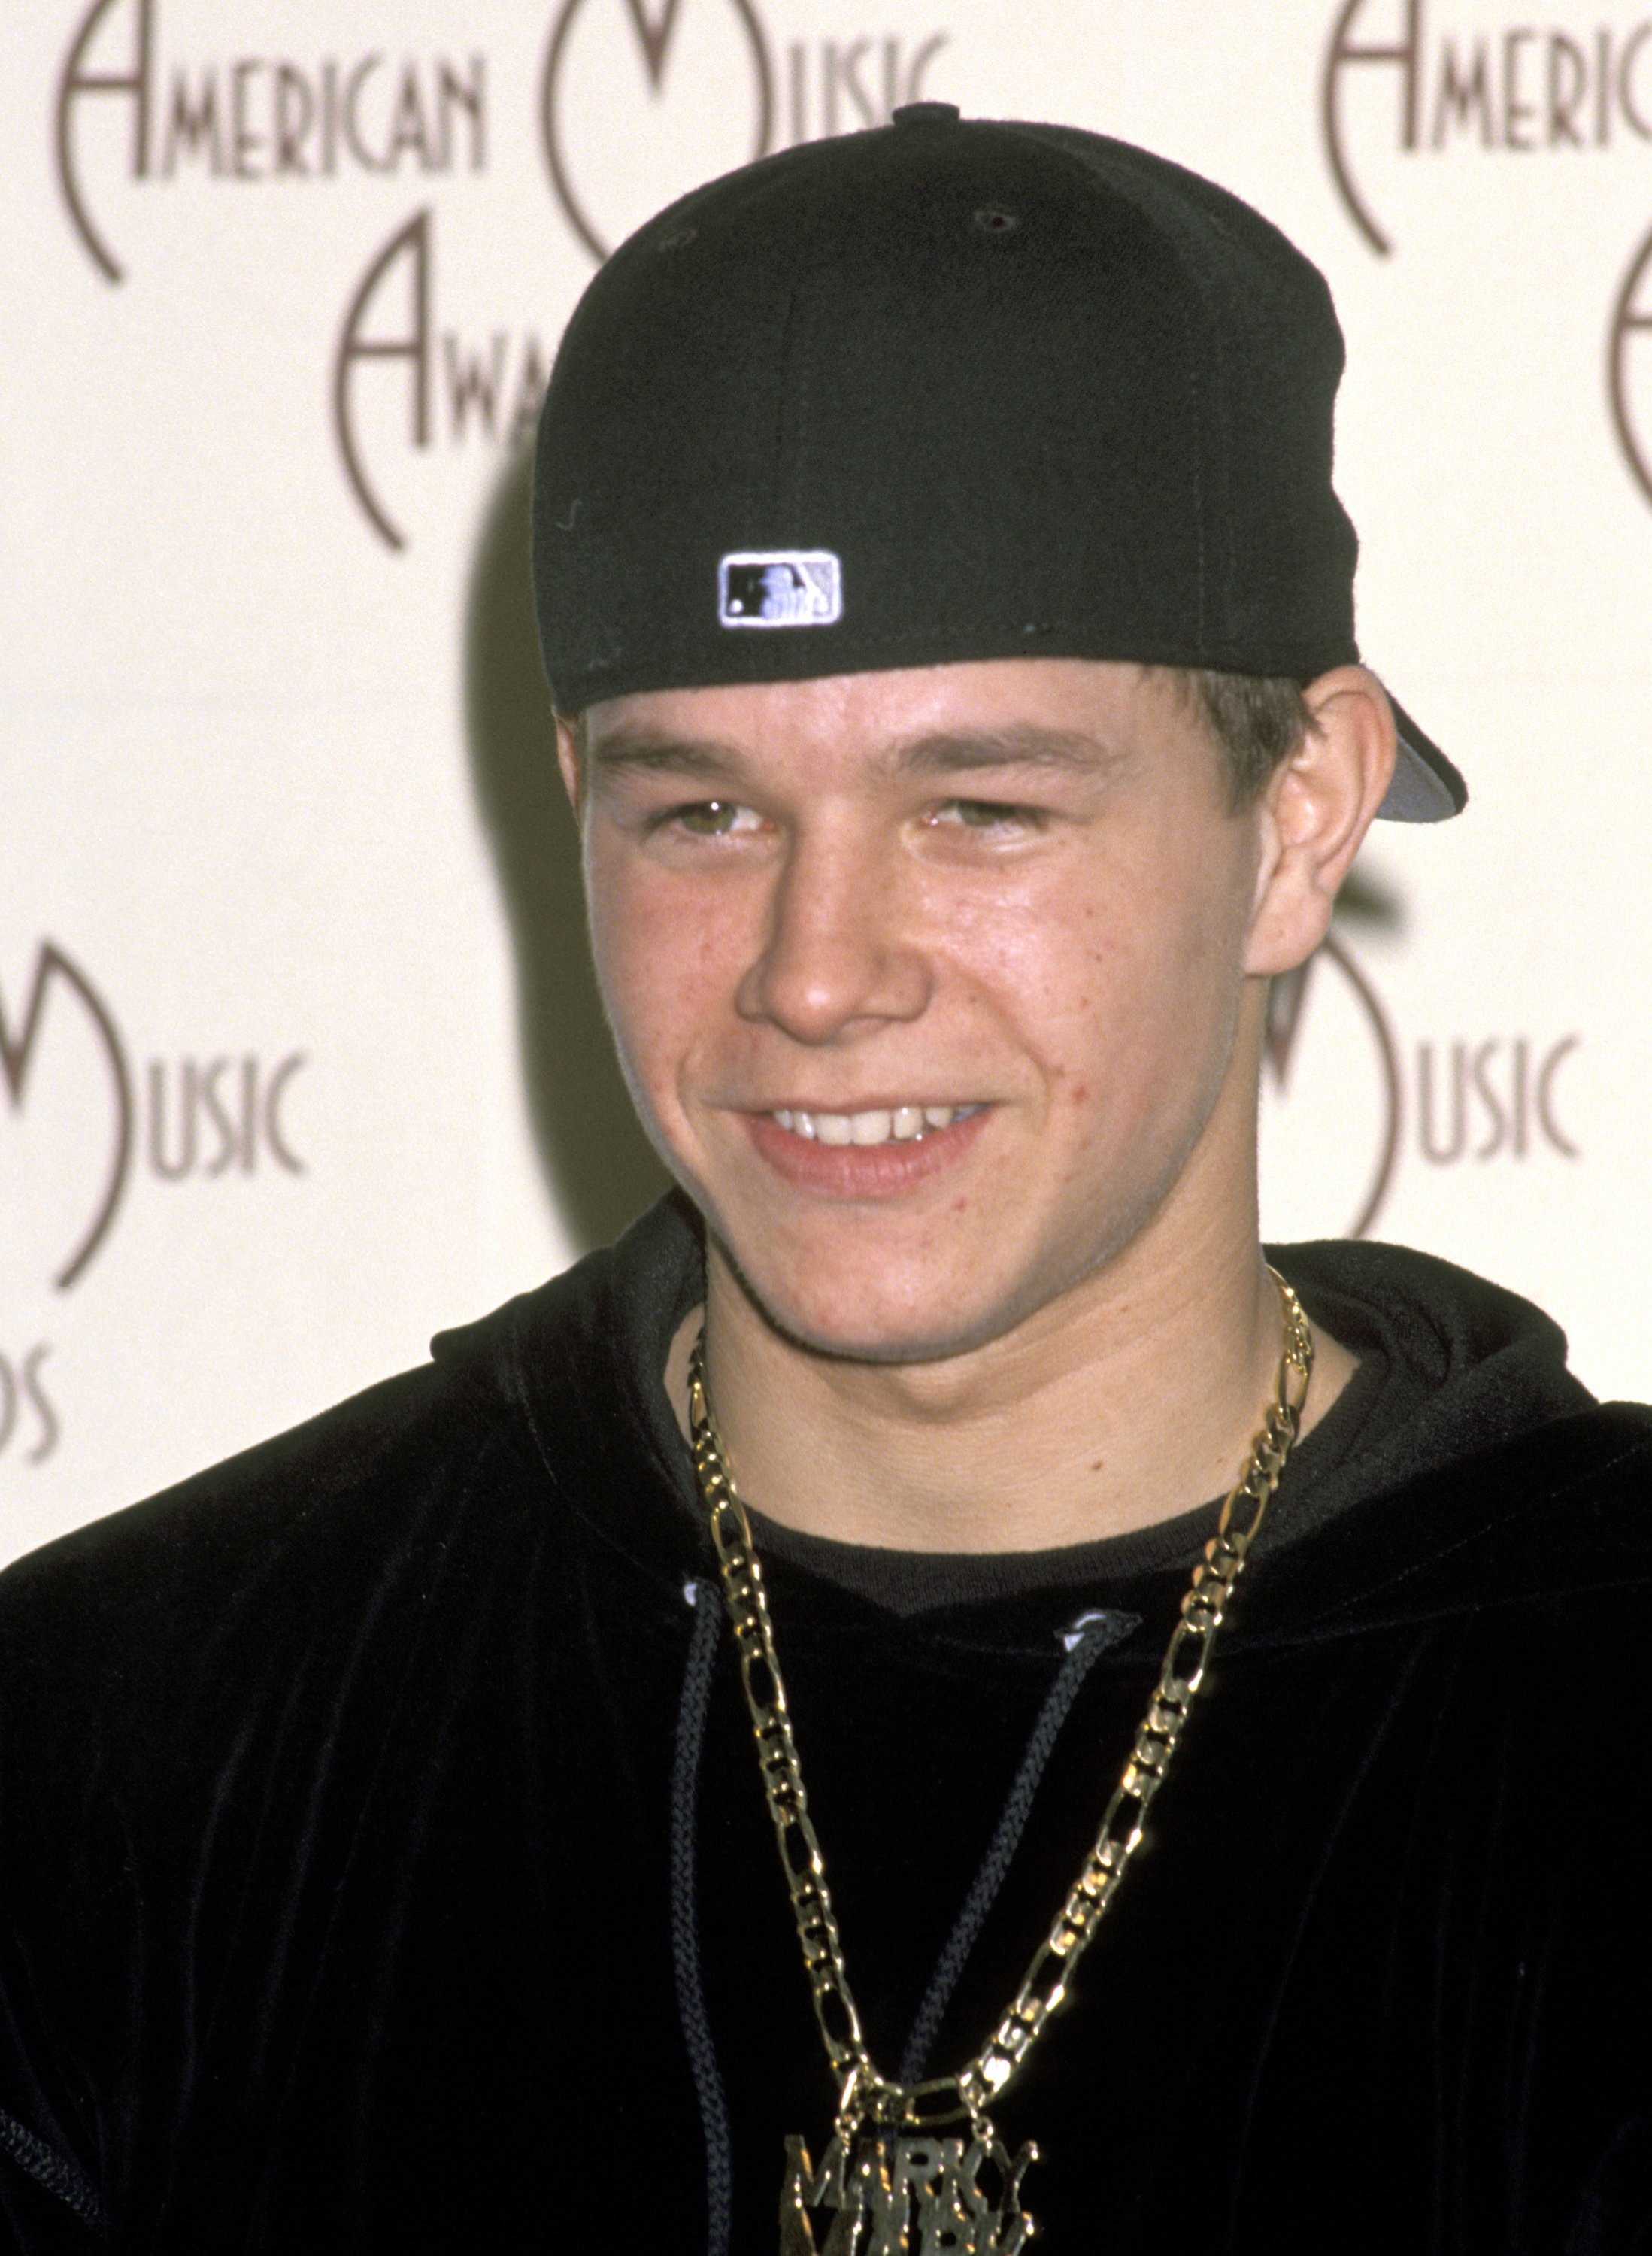 A young Mark Wahlberg | Source: Getty Images